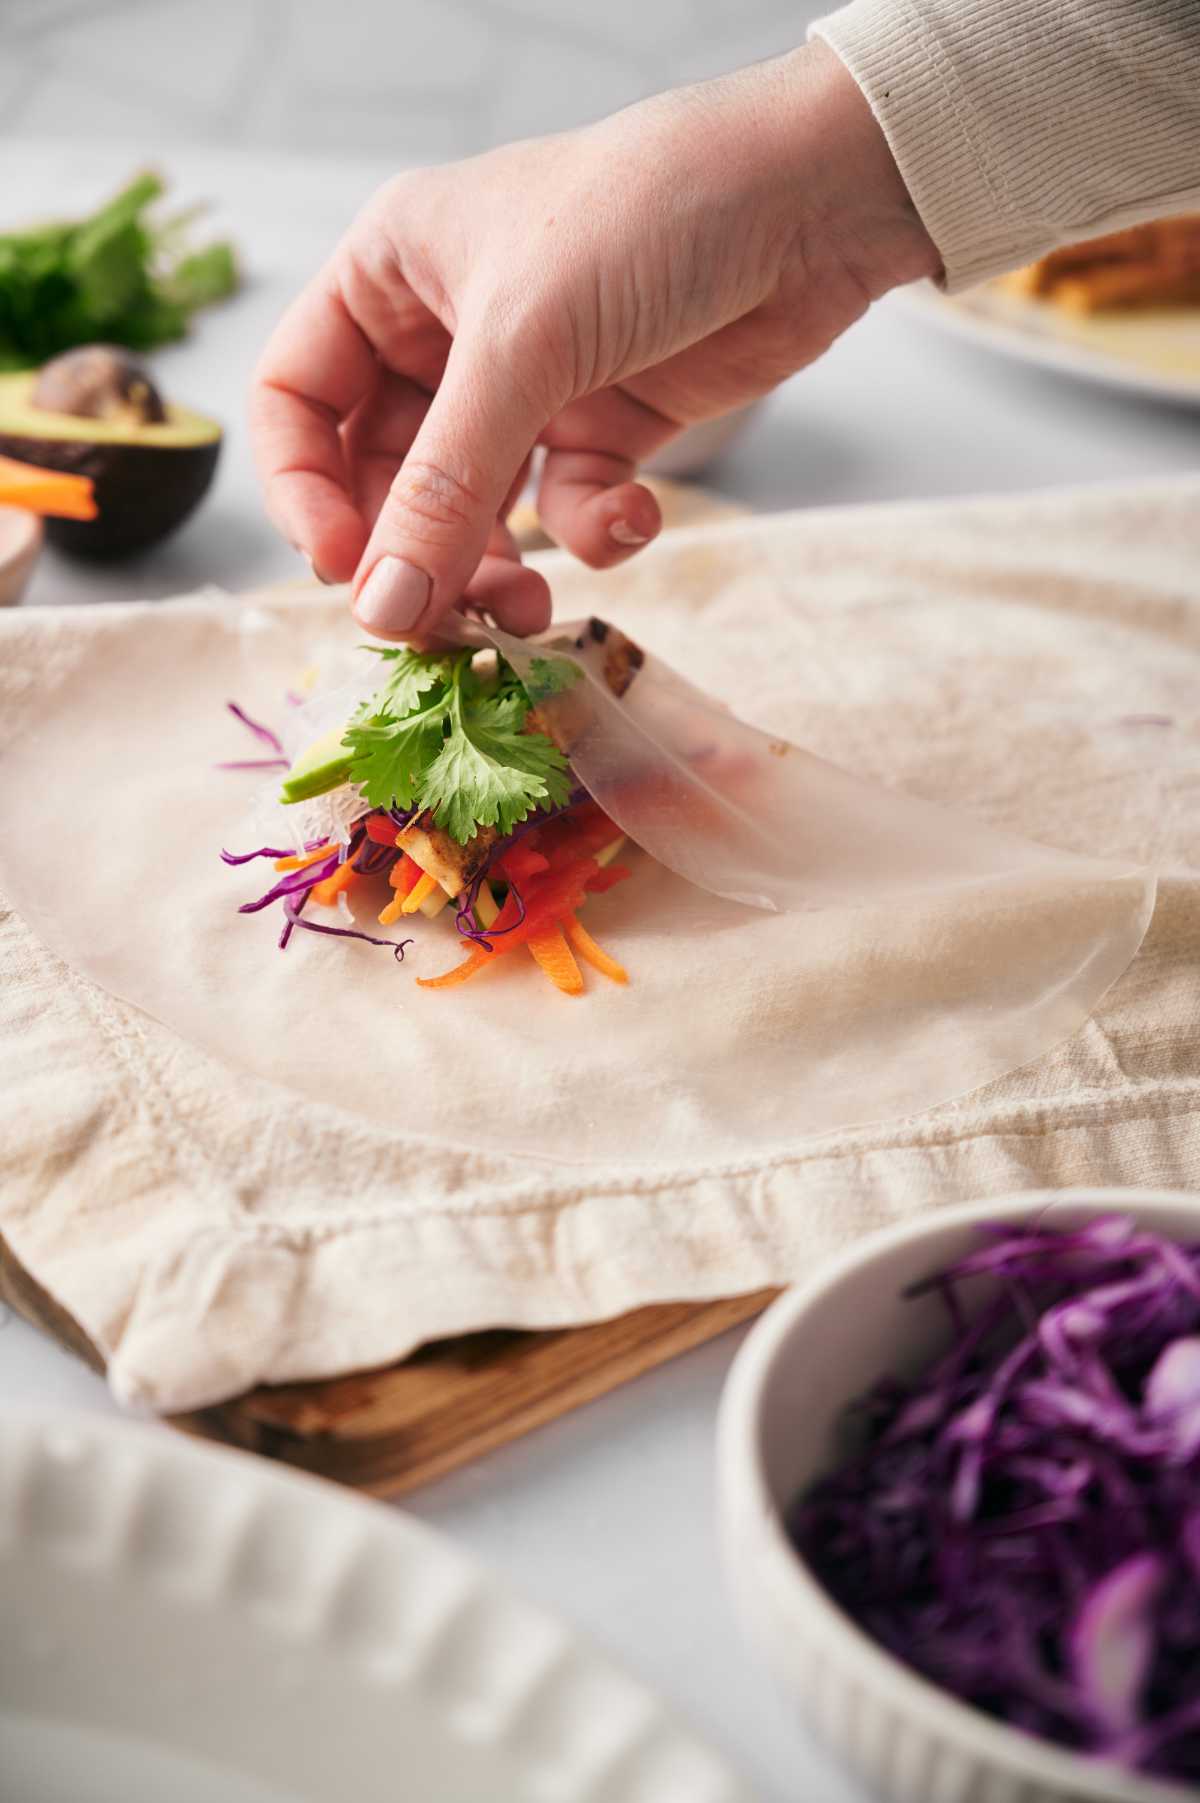 making summer rolls by folding rice paper sheet over filling